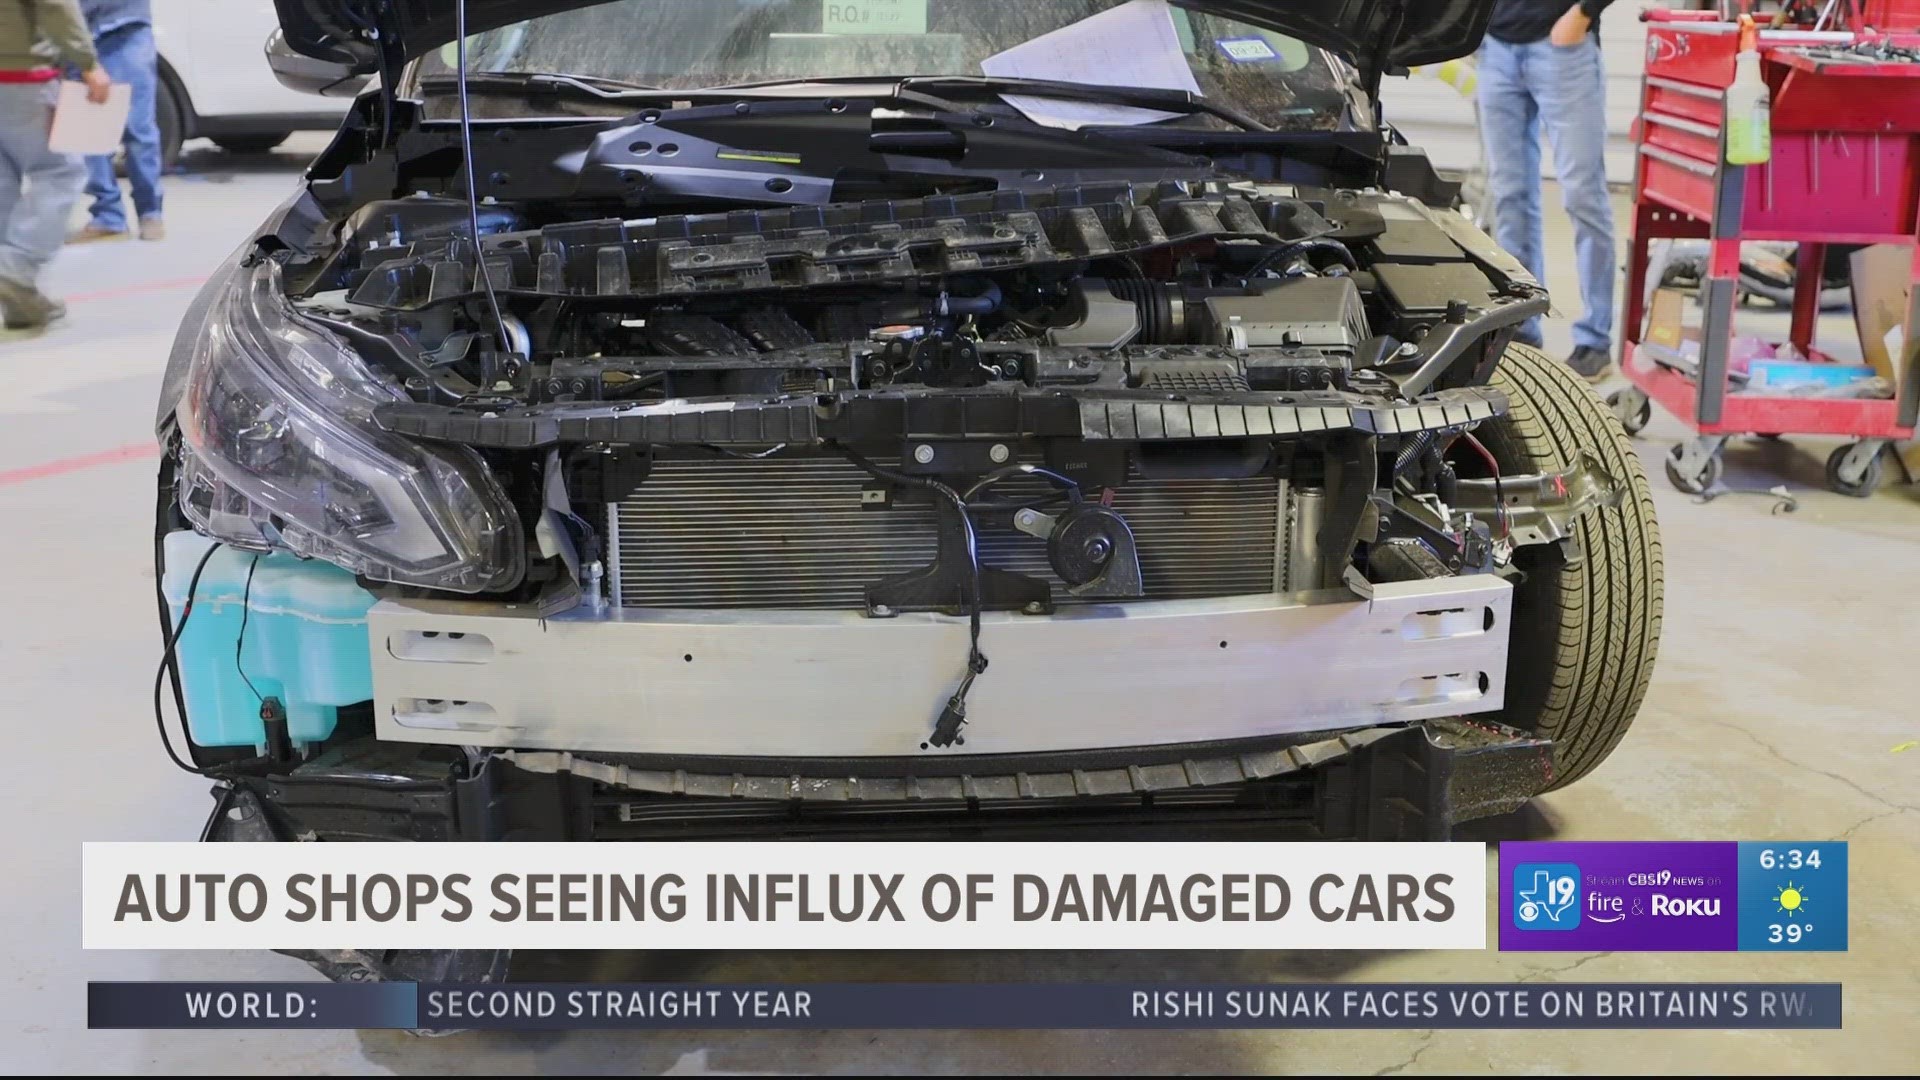 Suspension issues are the most common type of damage but auto shops have also seen body damage, particularly to bumpers from spinning out and hitting curbs.